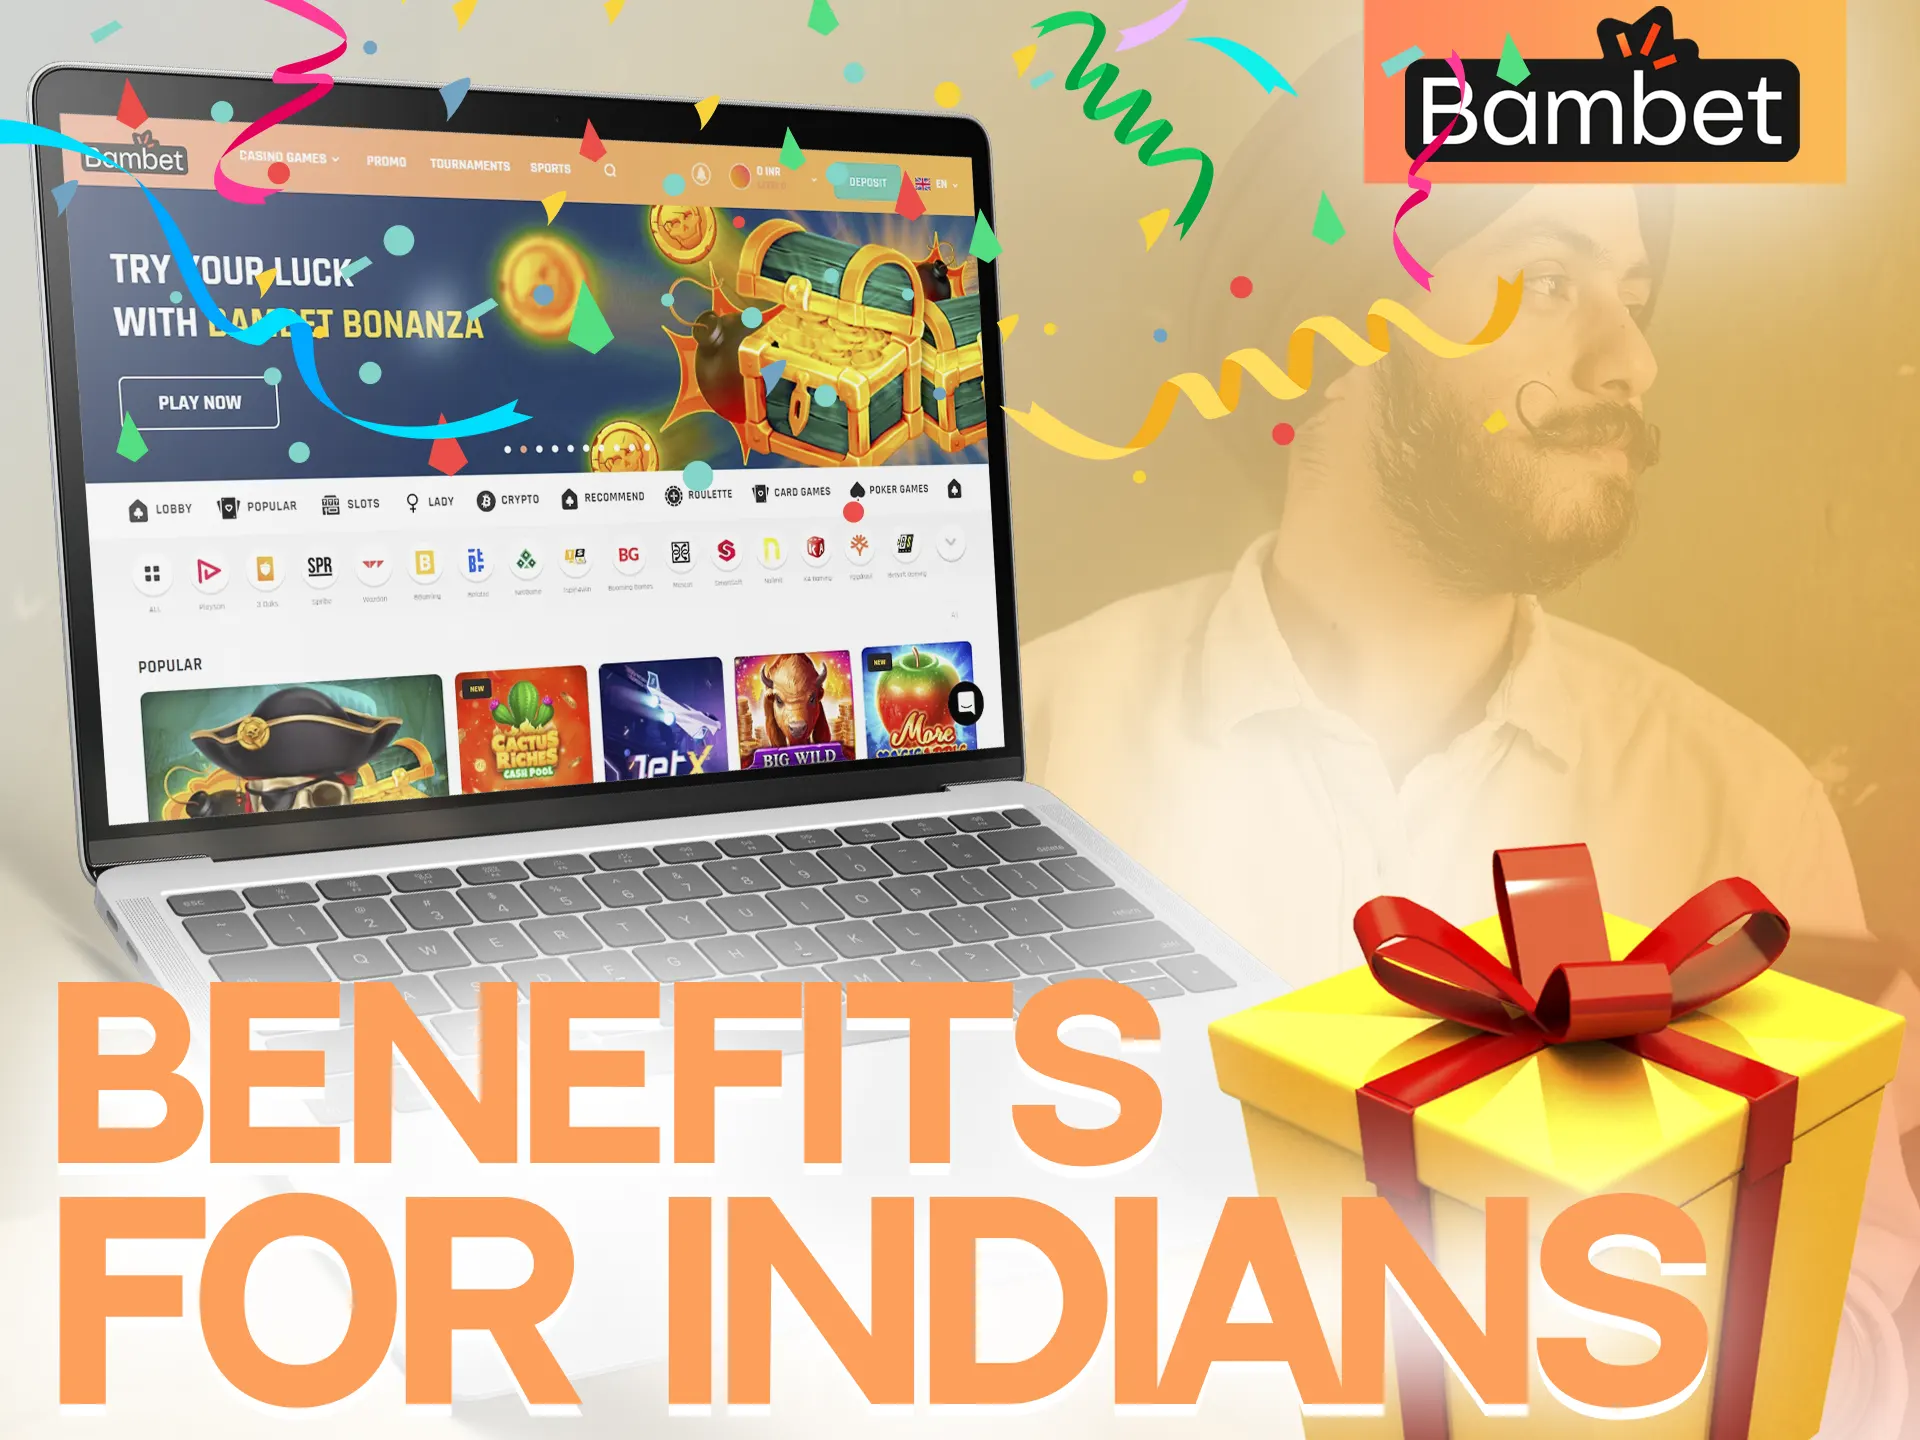 Bambet provides its players a lot of bonuses and benefits.